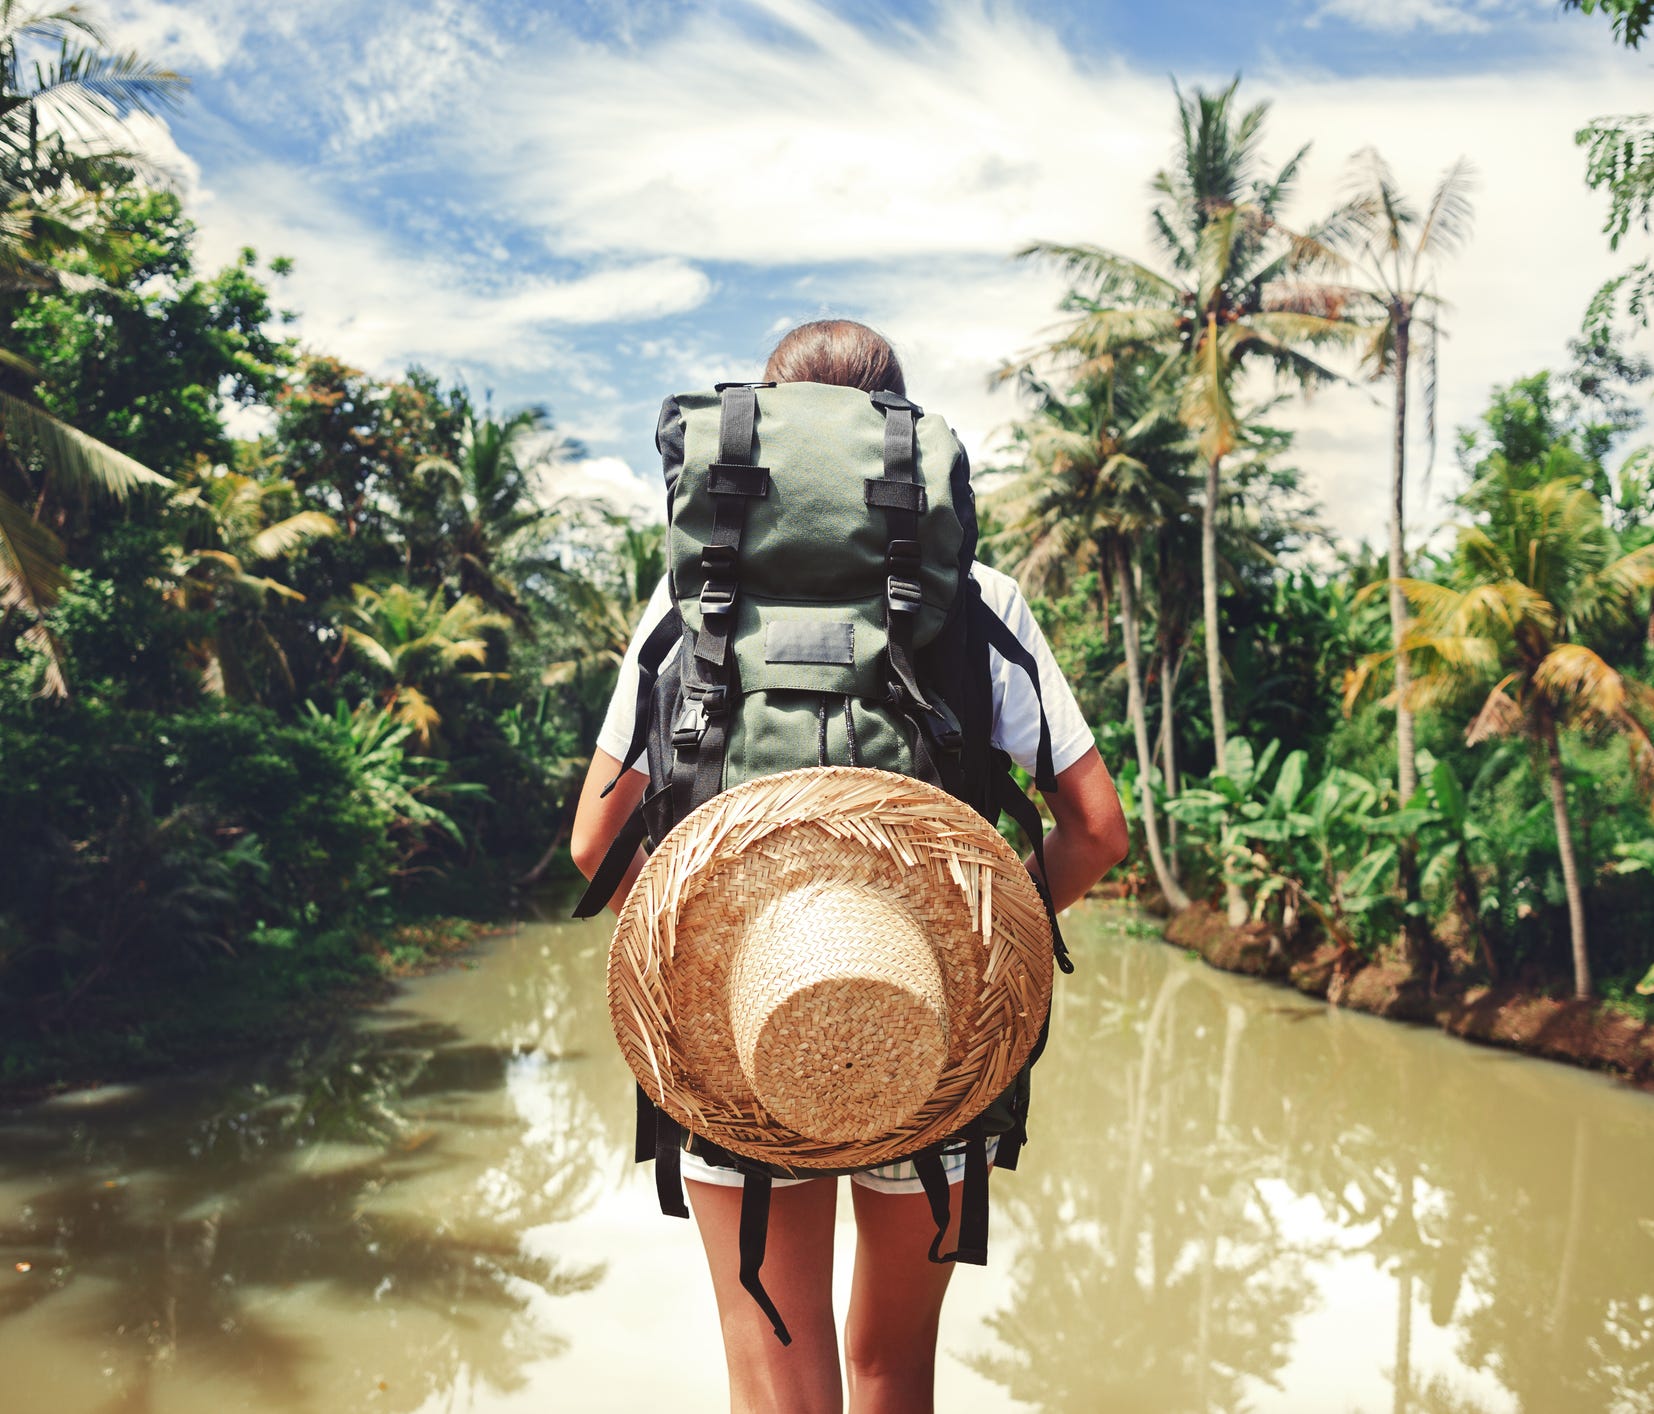 You might run into a problem with an annual travel insurance policy if you have an appetite for adventure.